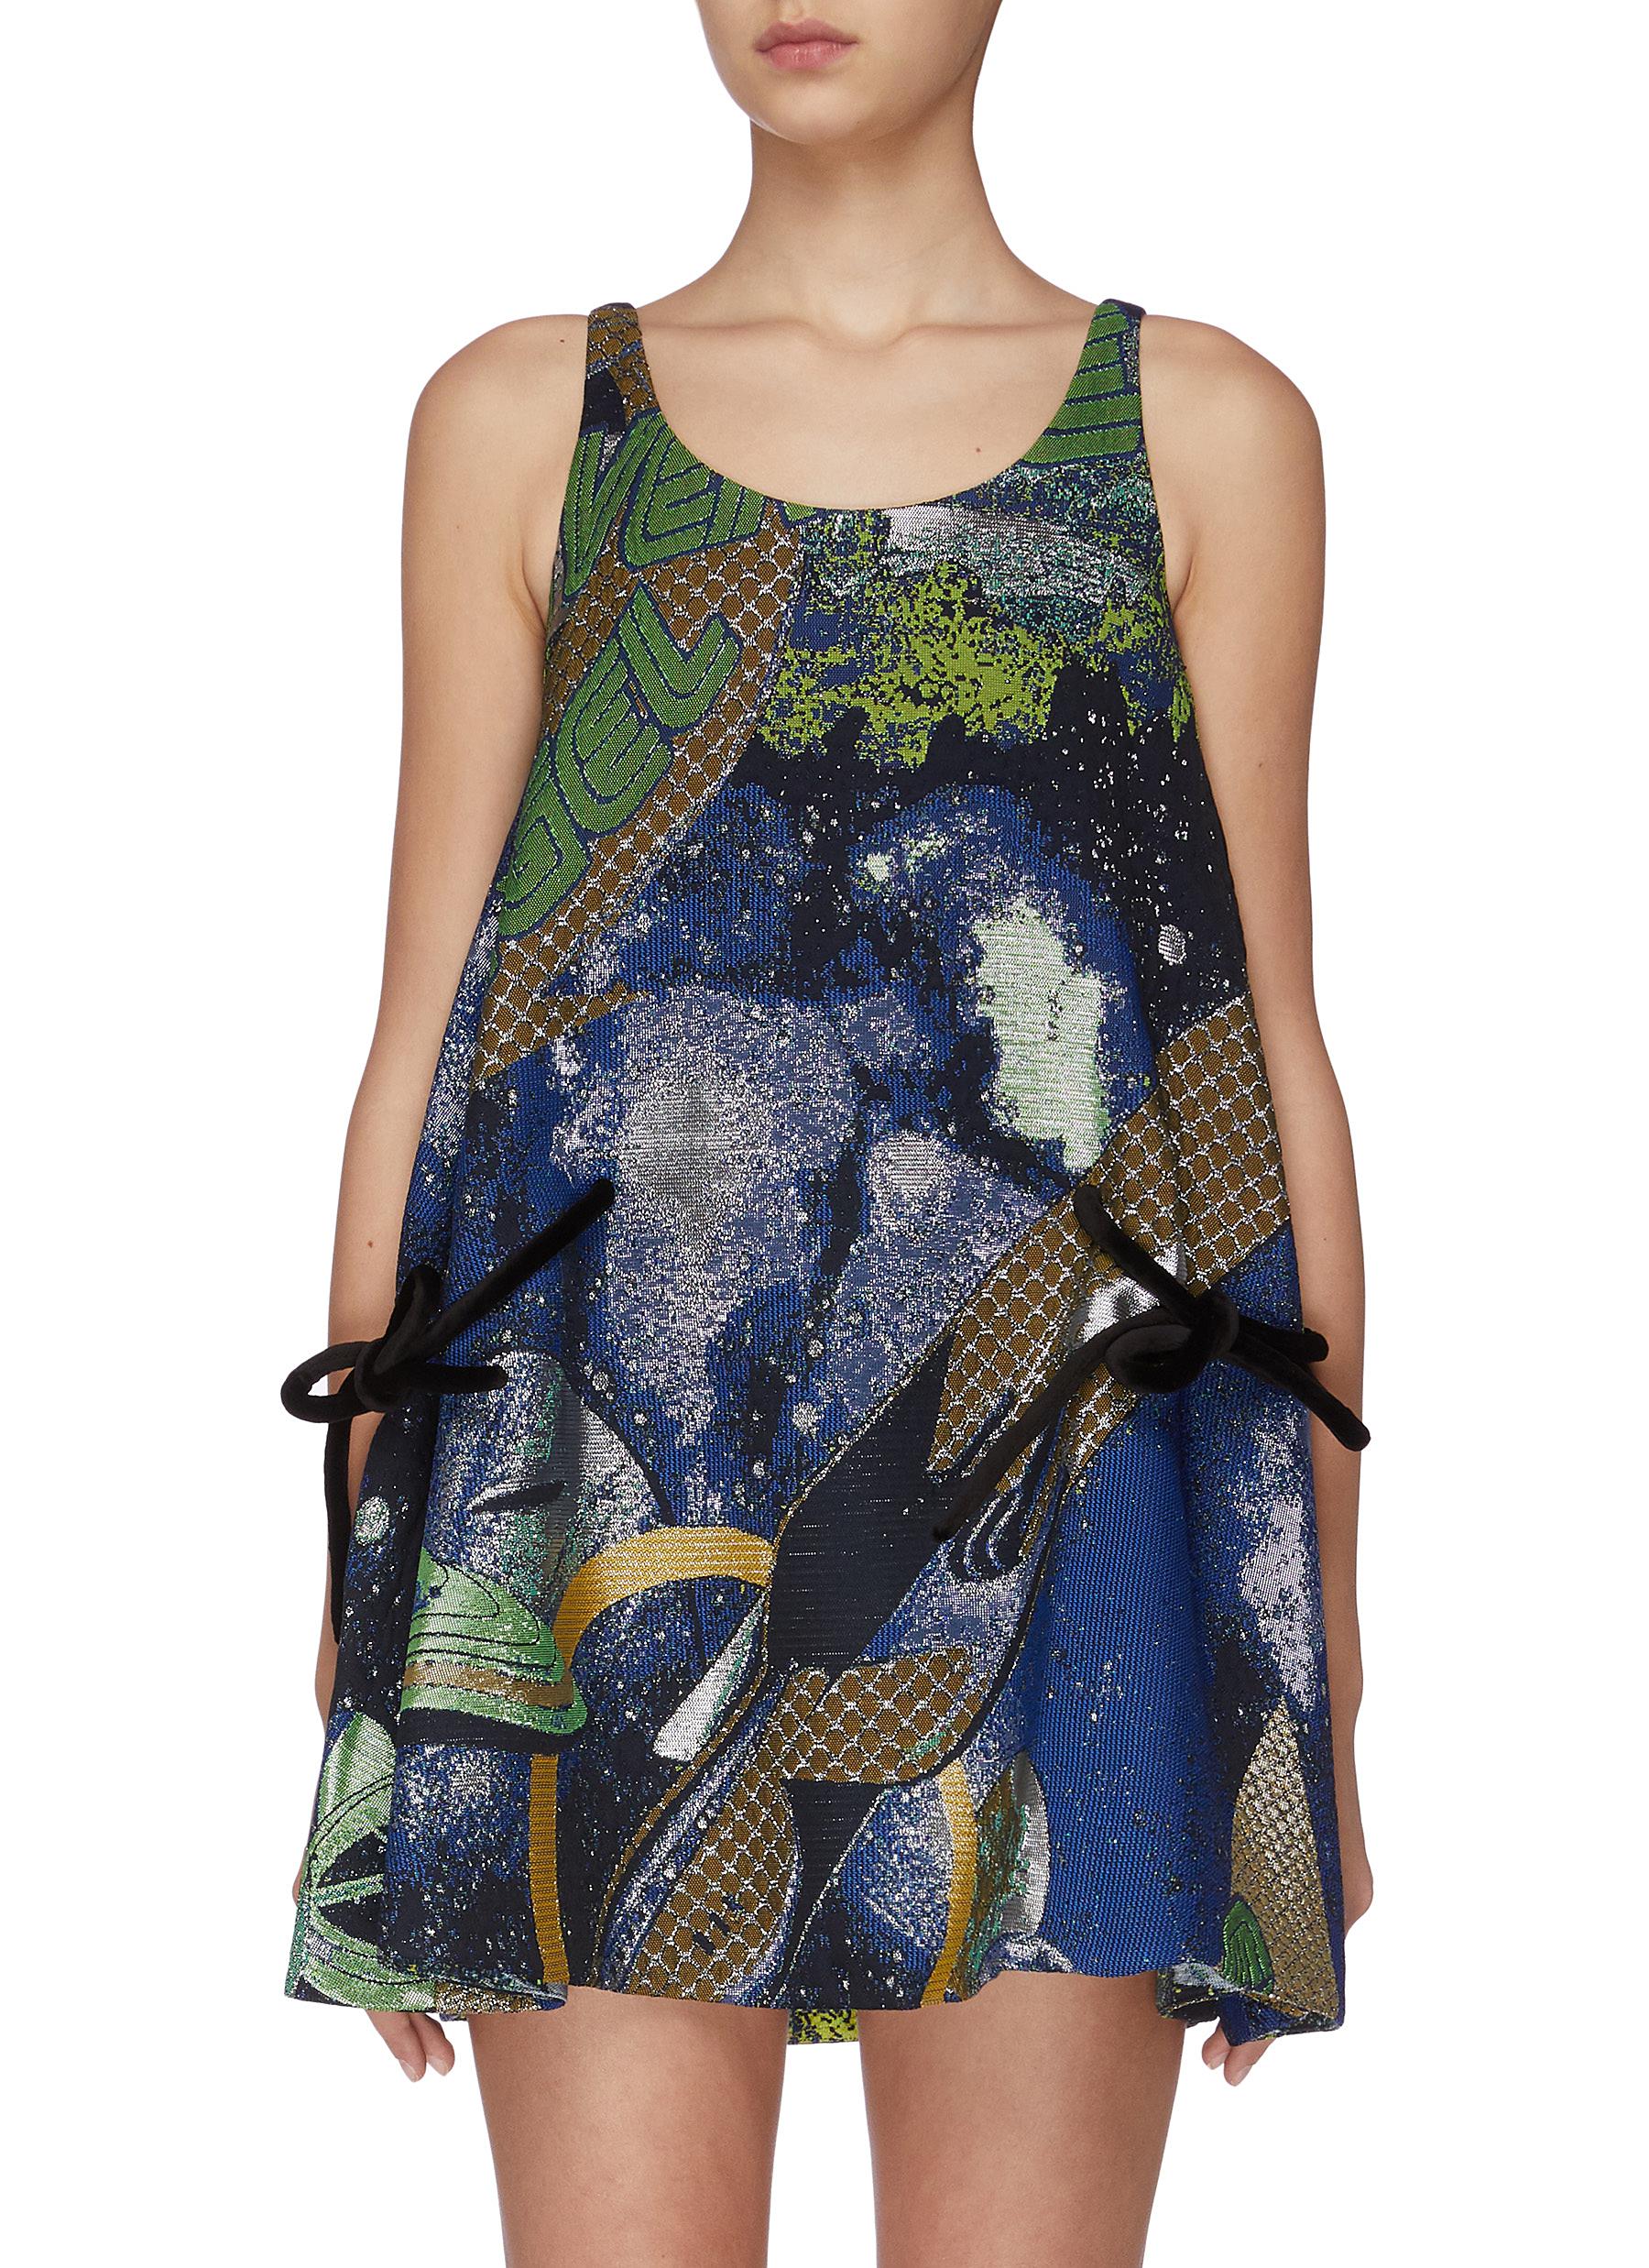 ANGEL CHEN 'UNIVERSE' TIE ELEMENT MIXED EMBROIDERY JACQUARD DRESS